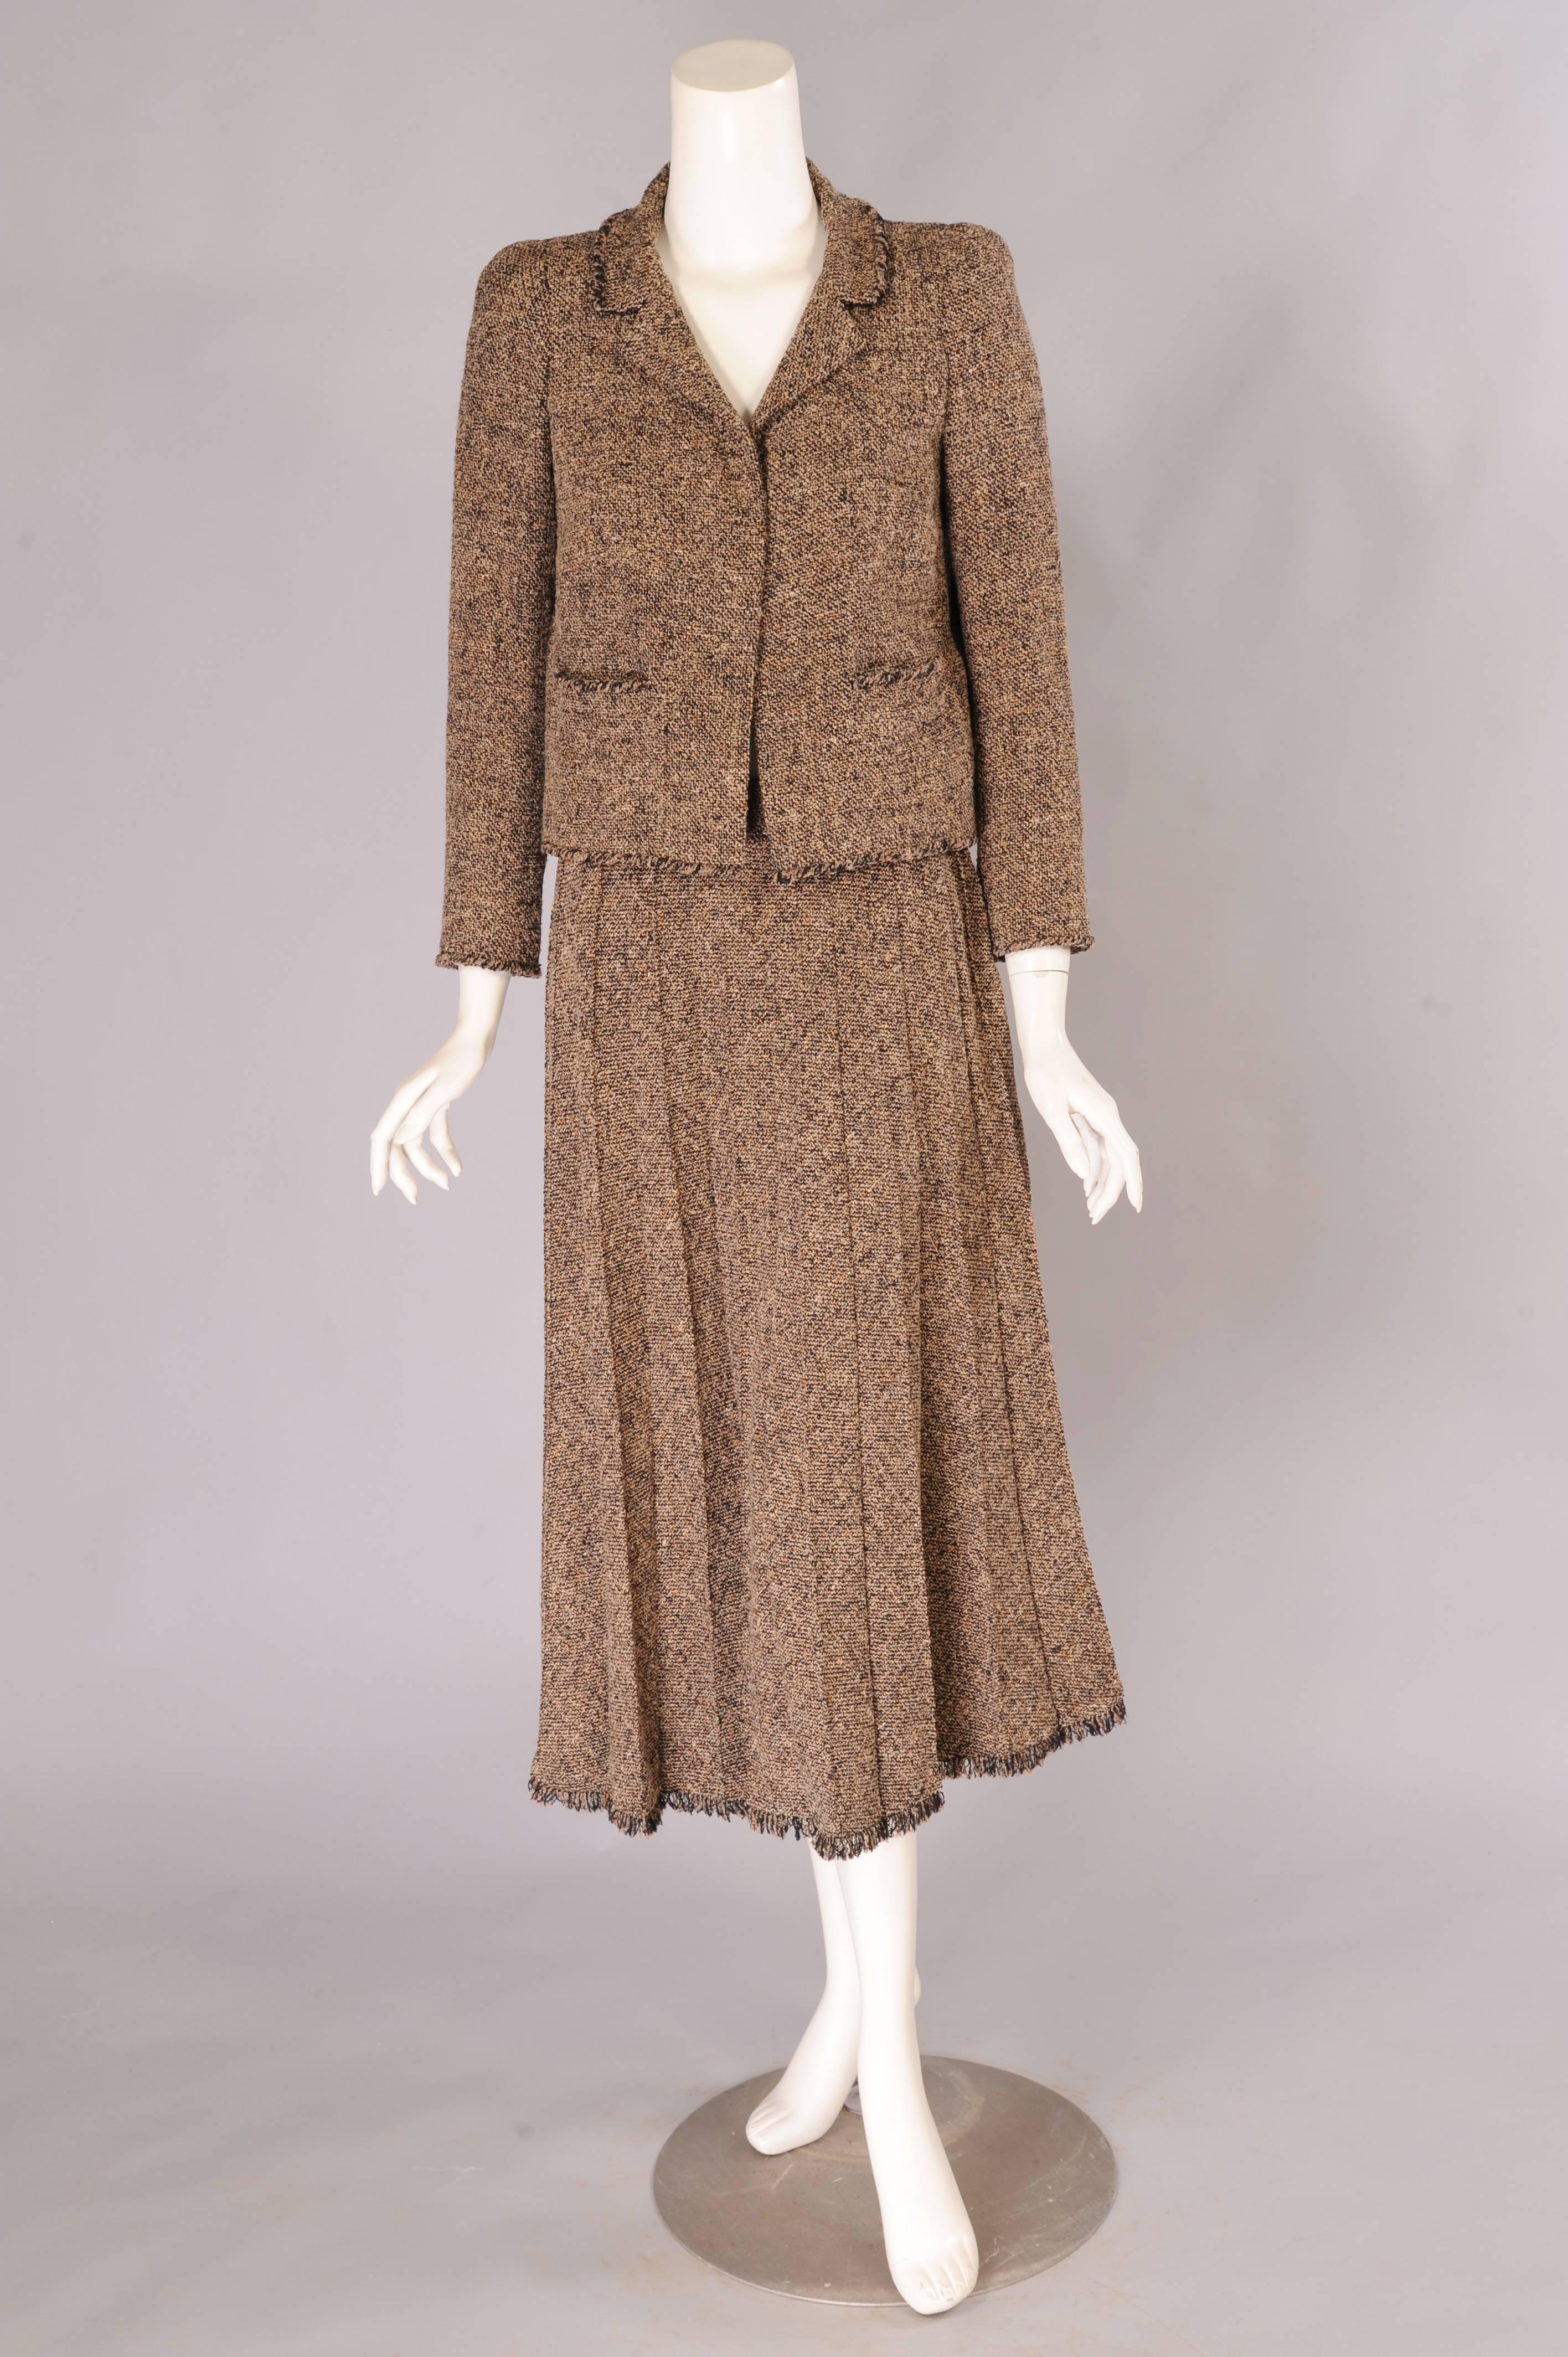 This beautiful tweed suit in shades of black and beige with a hint of coral has the classic Chanel braid trim on the collar, cuffs, pockets and hemline. The jacket is fully lined in hand finished black silk and it has the gold chain on the inside